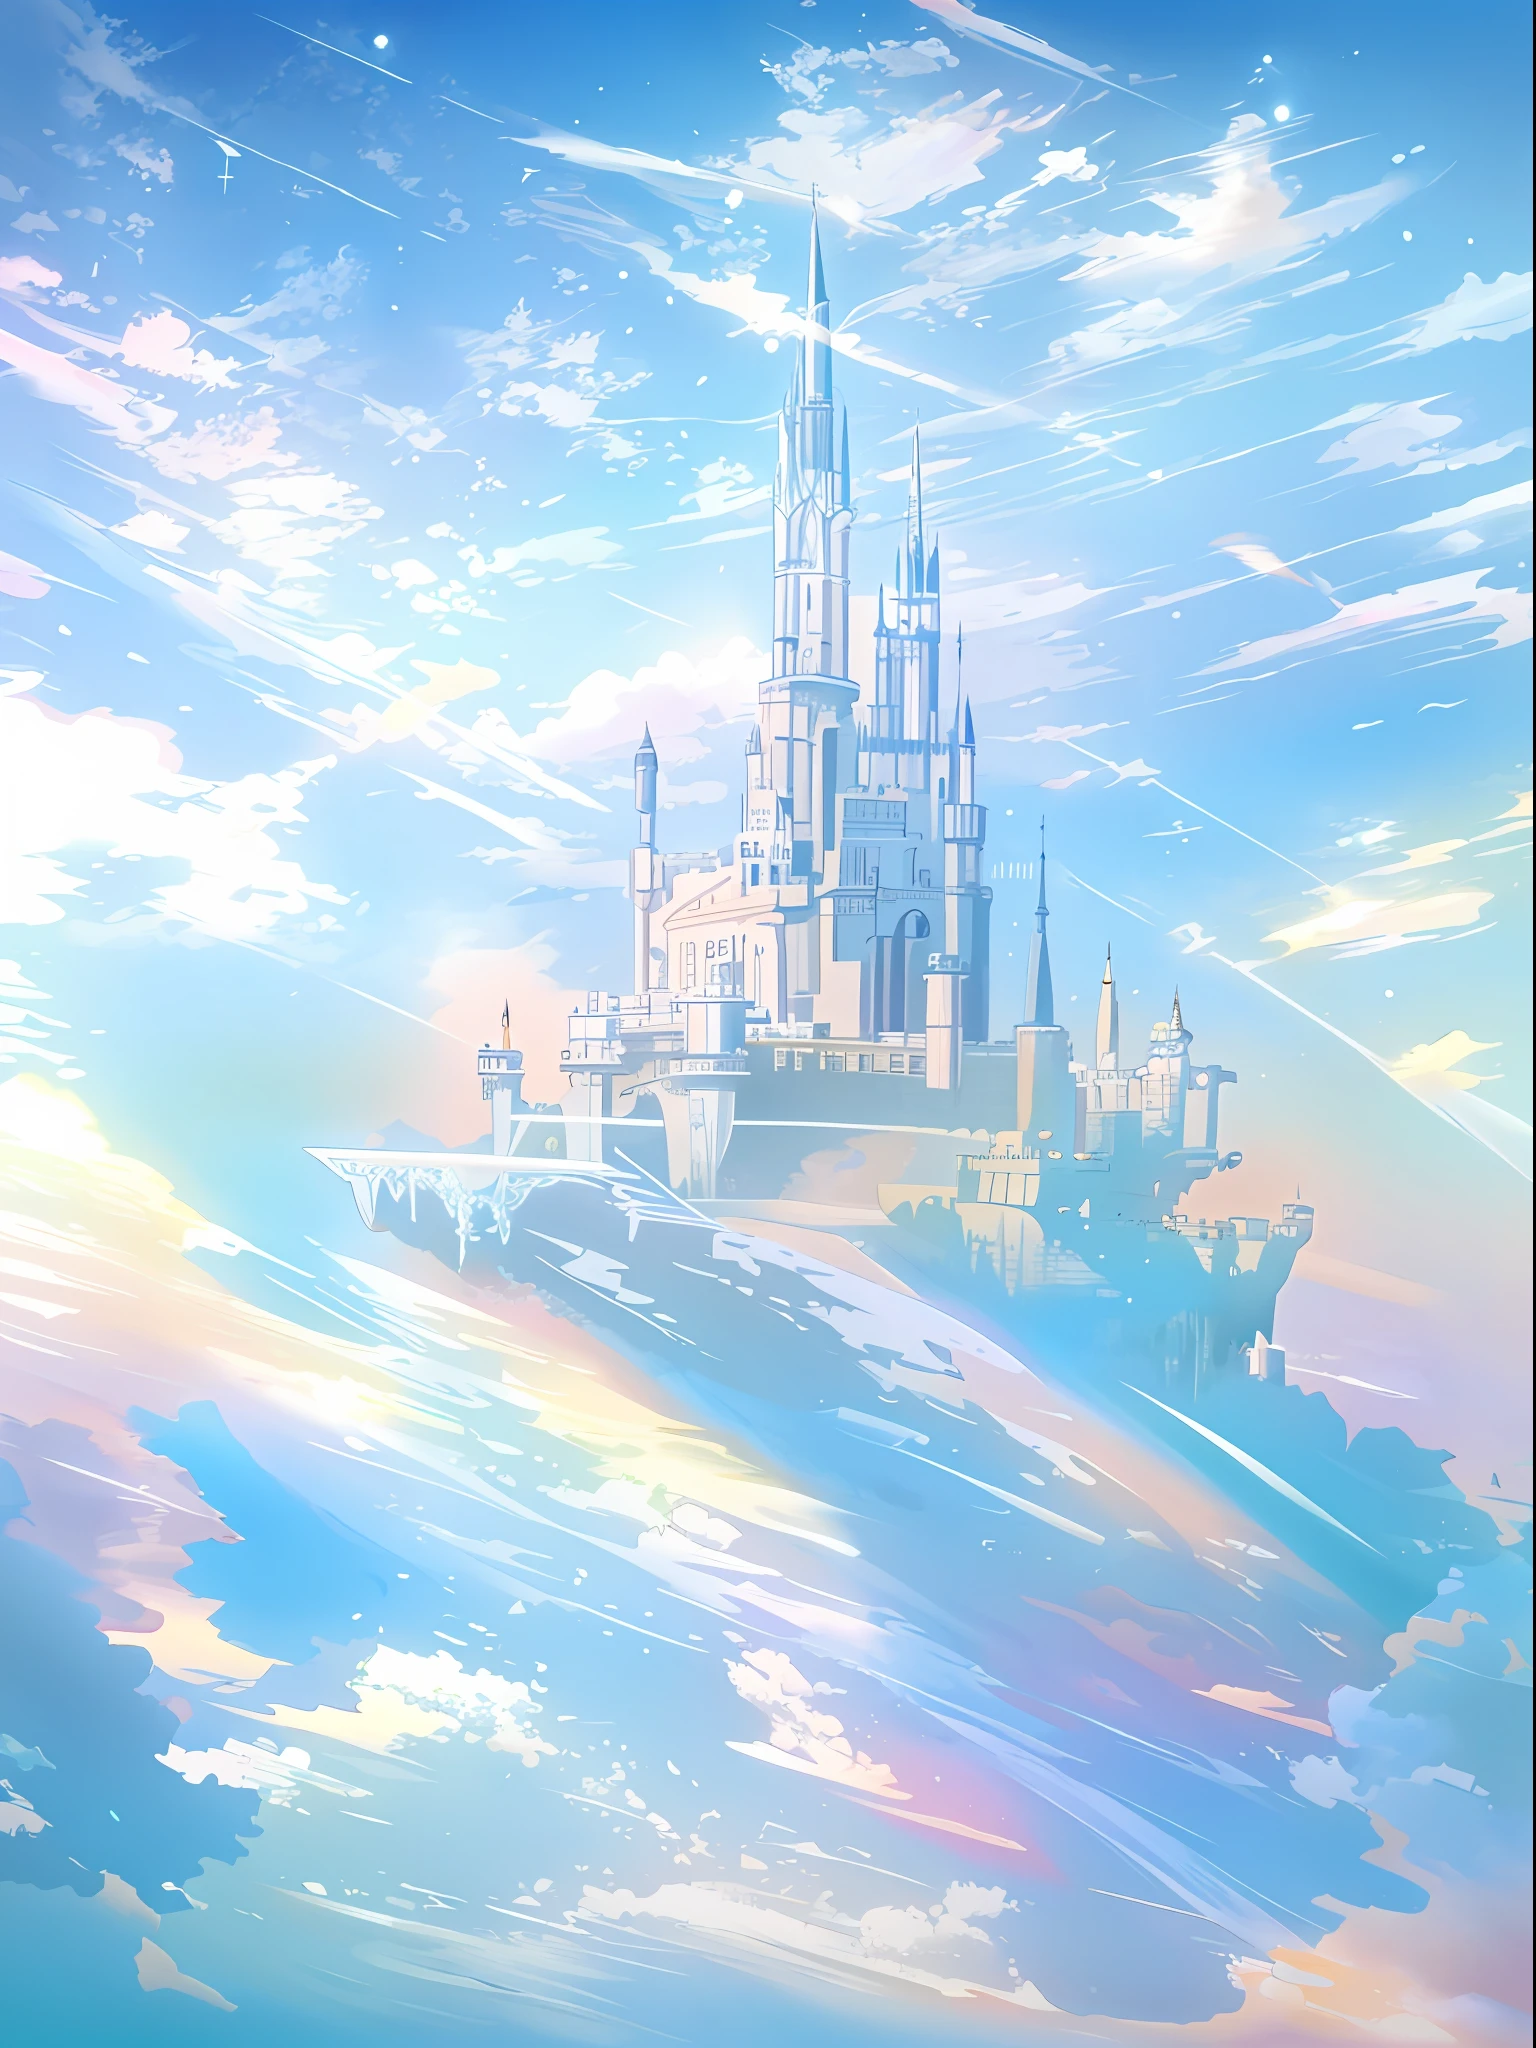 8k, Disney castle in the sky with reflection of water, fantastic sky and water surface, fairy tale style background, flying cloud castle, magical castle, castle background, magical background, kingdom of light background, palace background, palace floating in the sky, palace floating in heaven, beautiful fantasy anime, milky white palace, beautiful castle, castle made of clouds, cloud palace, fantasy castle, anime background